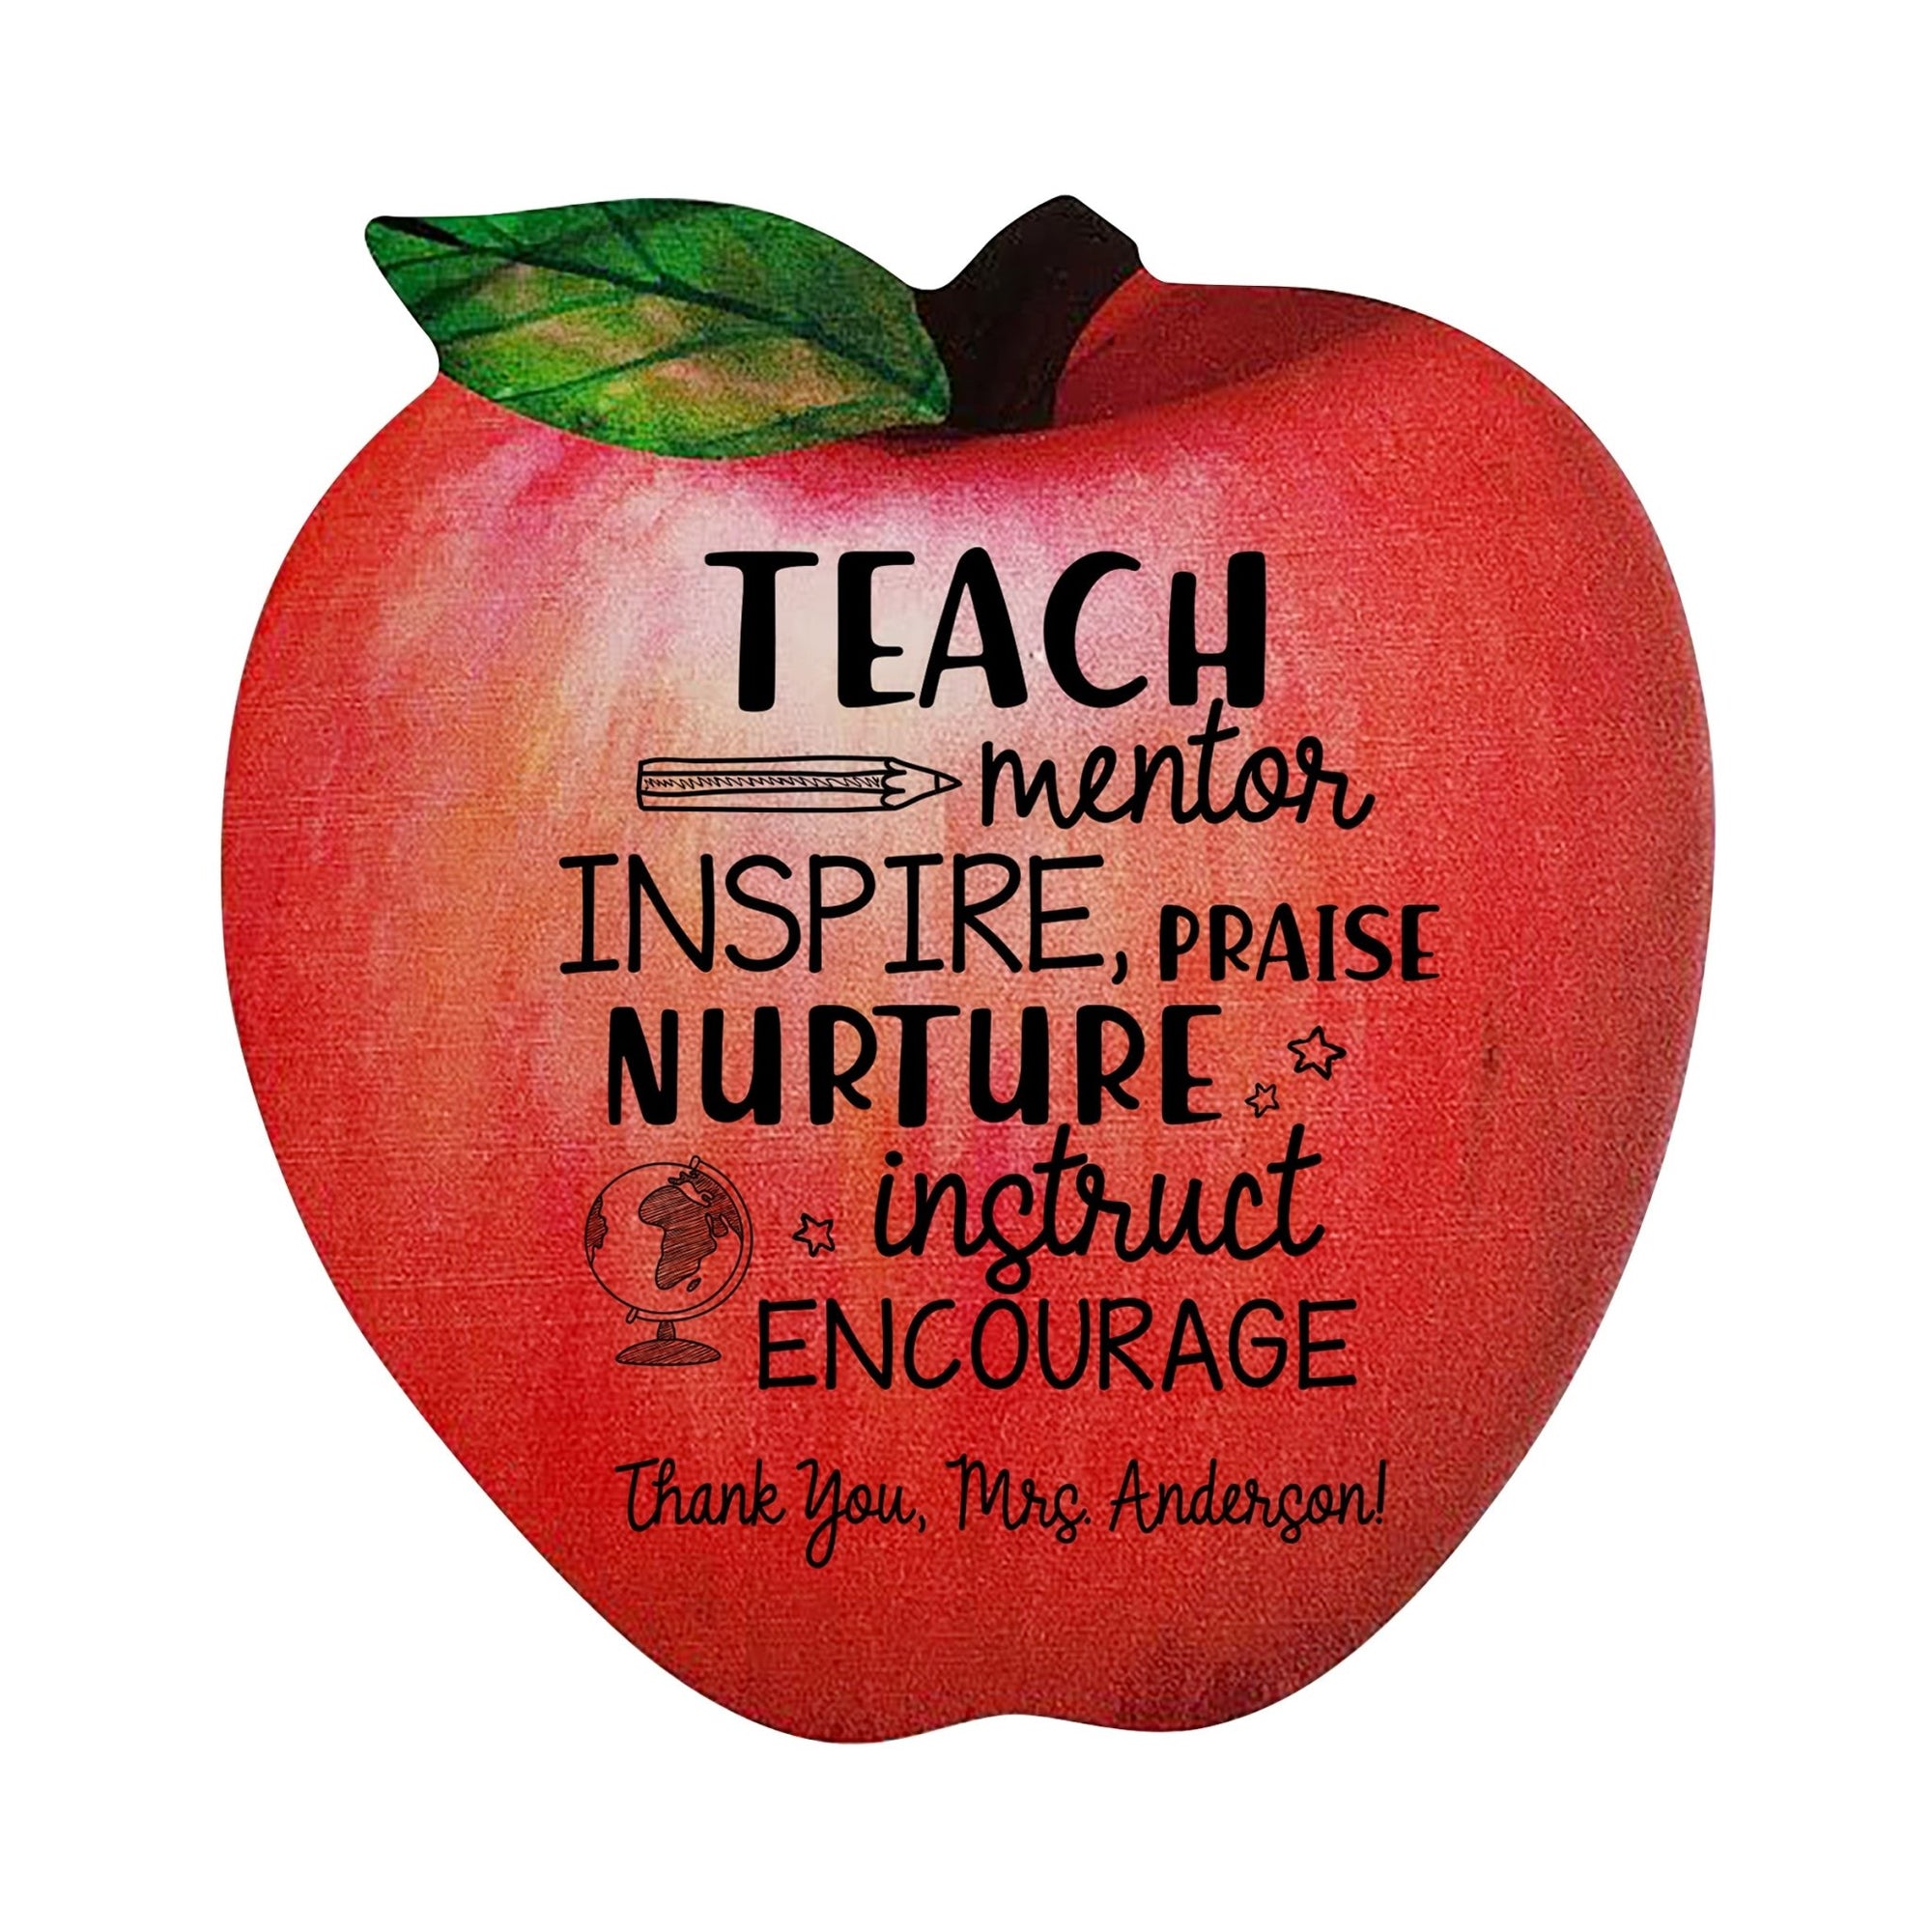 Customized Apple Shape Plaque for Teachers 6” x 5.75” It Takes A Big Heart - LifeSong Milestones